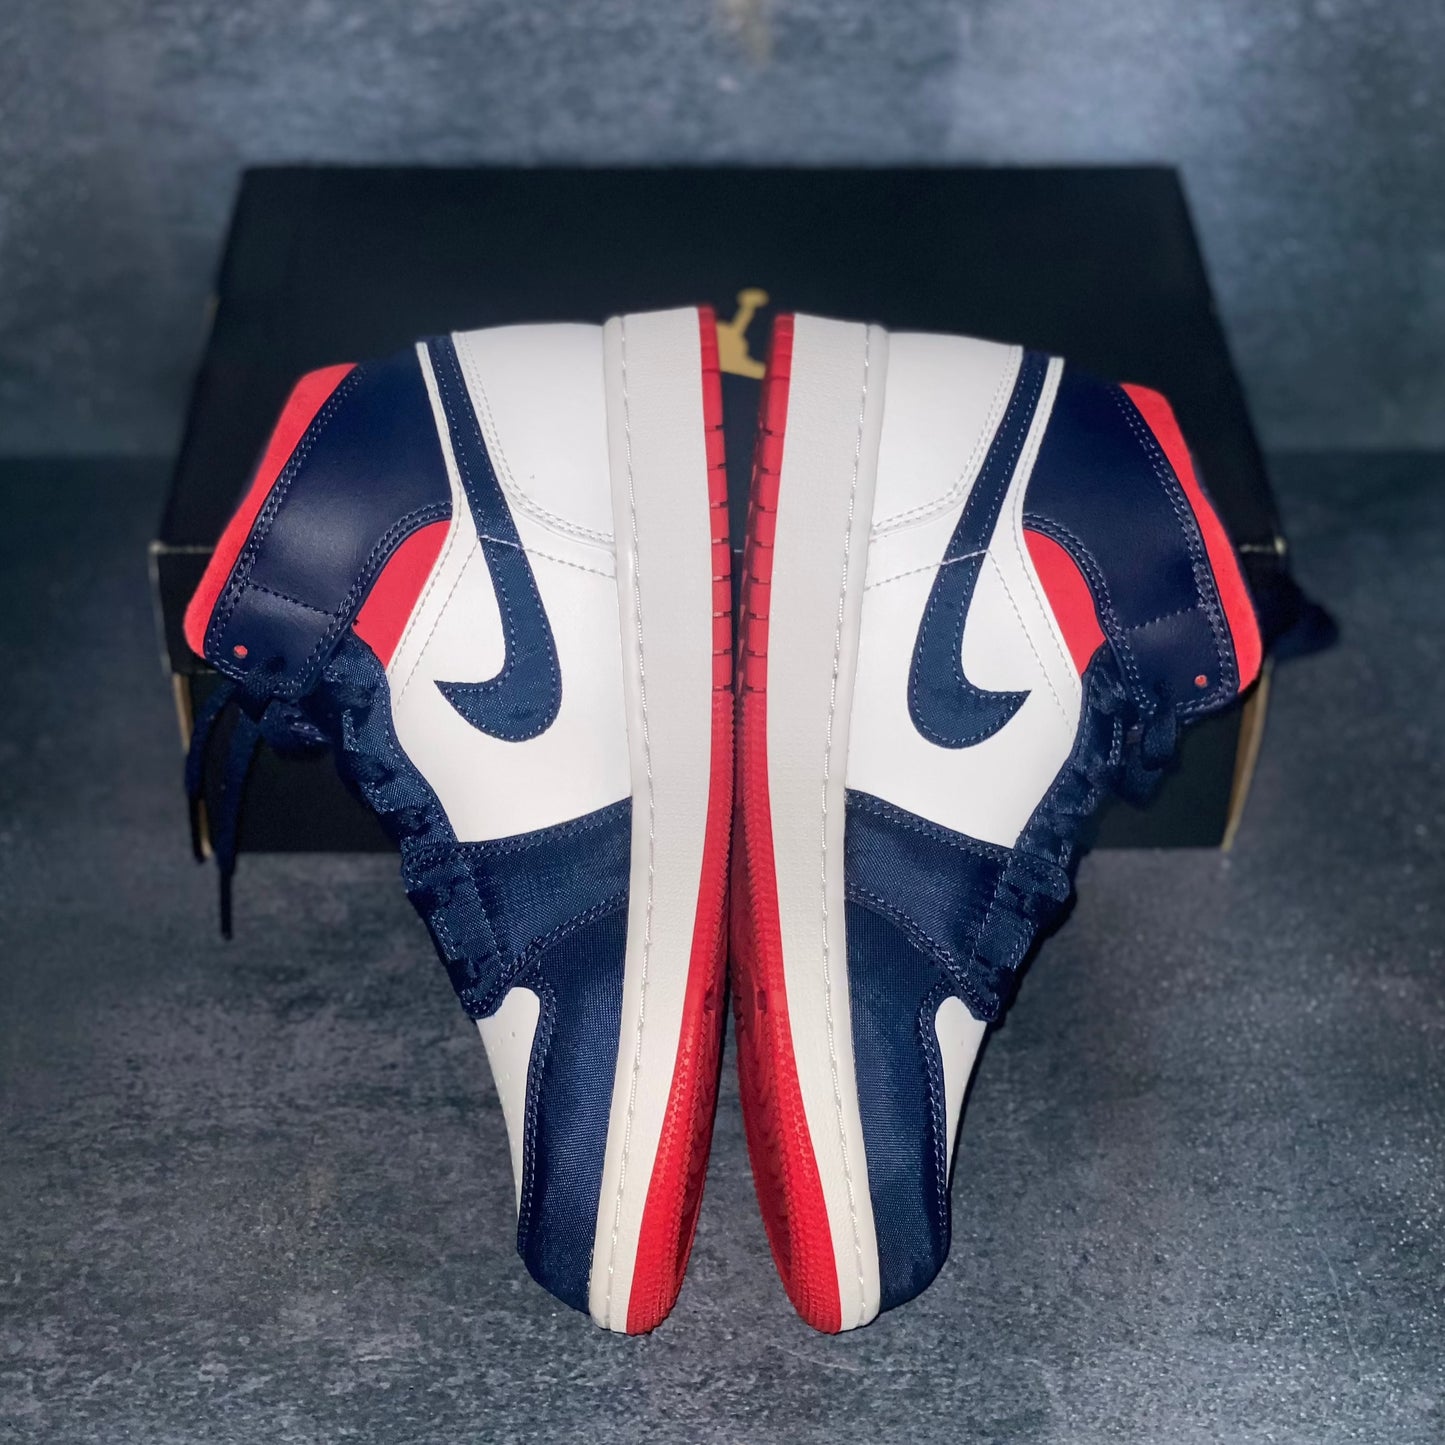 The medial side of the red, white, and blue Nike Air Jordan 1 Mid sneakers with a black Air Jordan sneaker box.